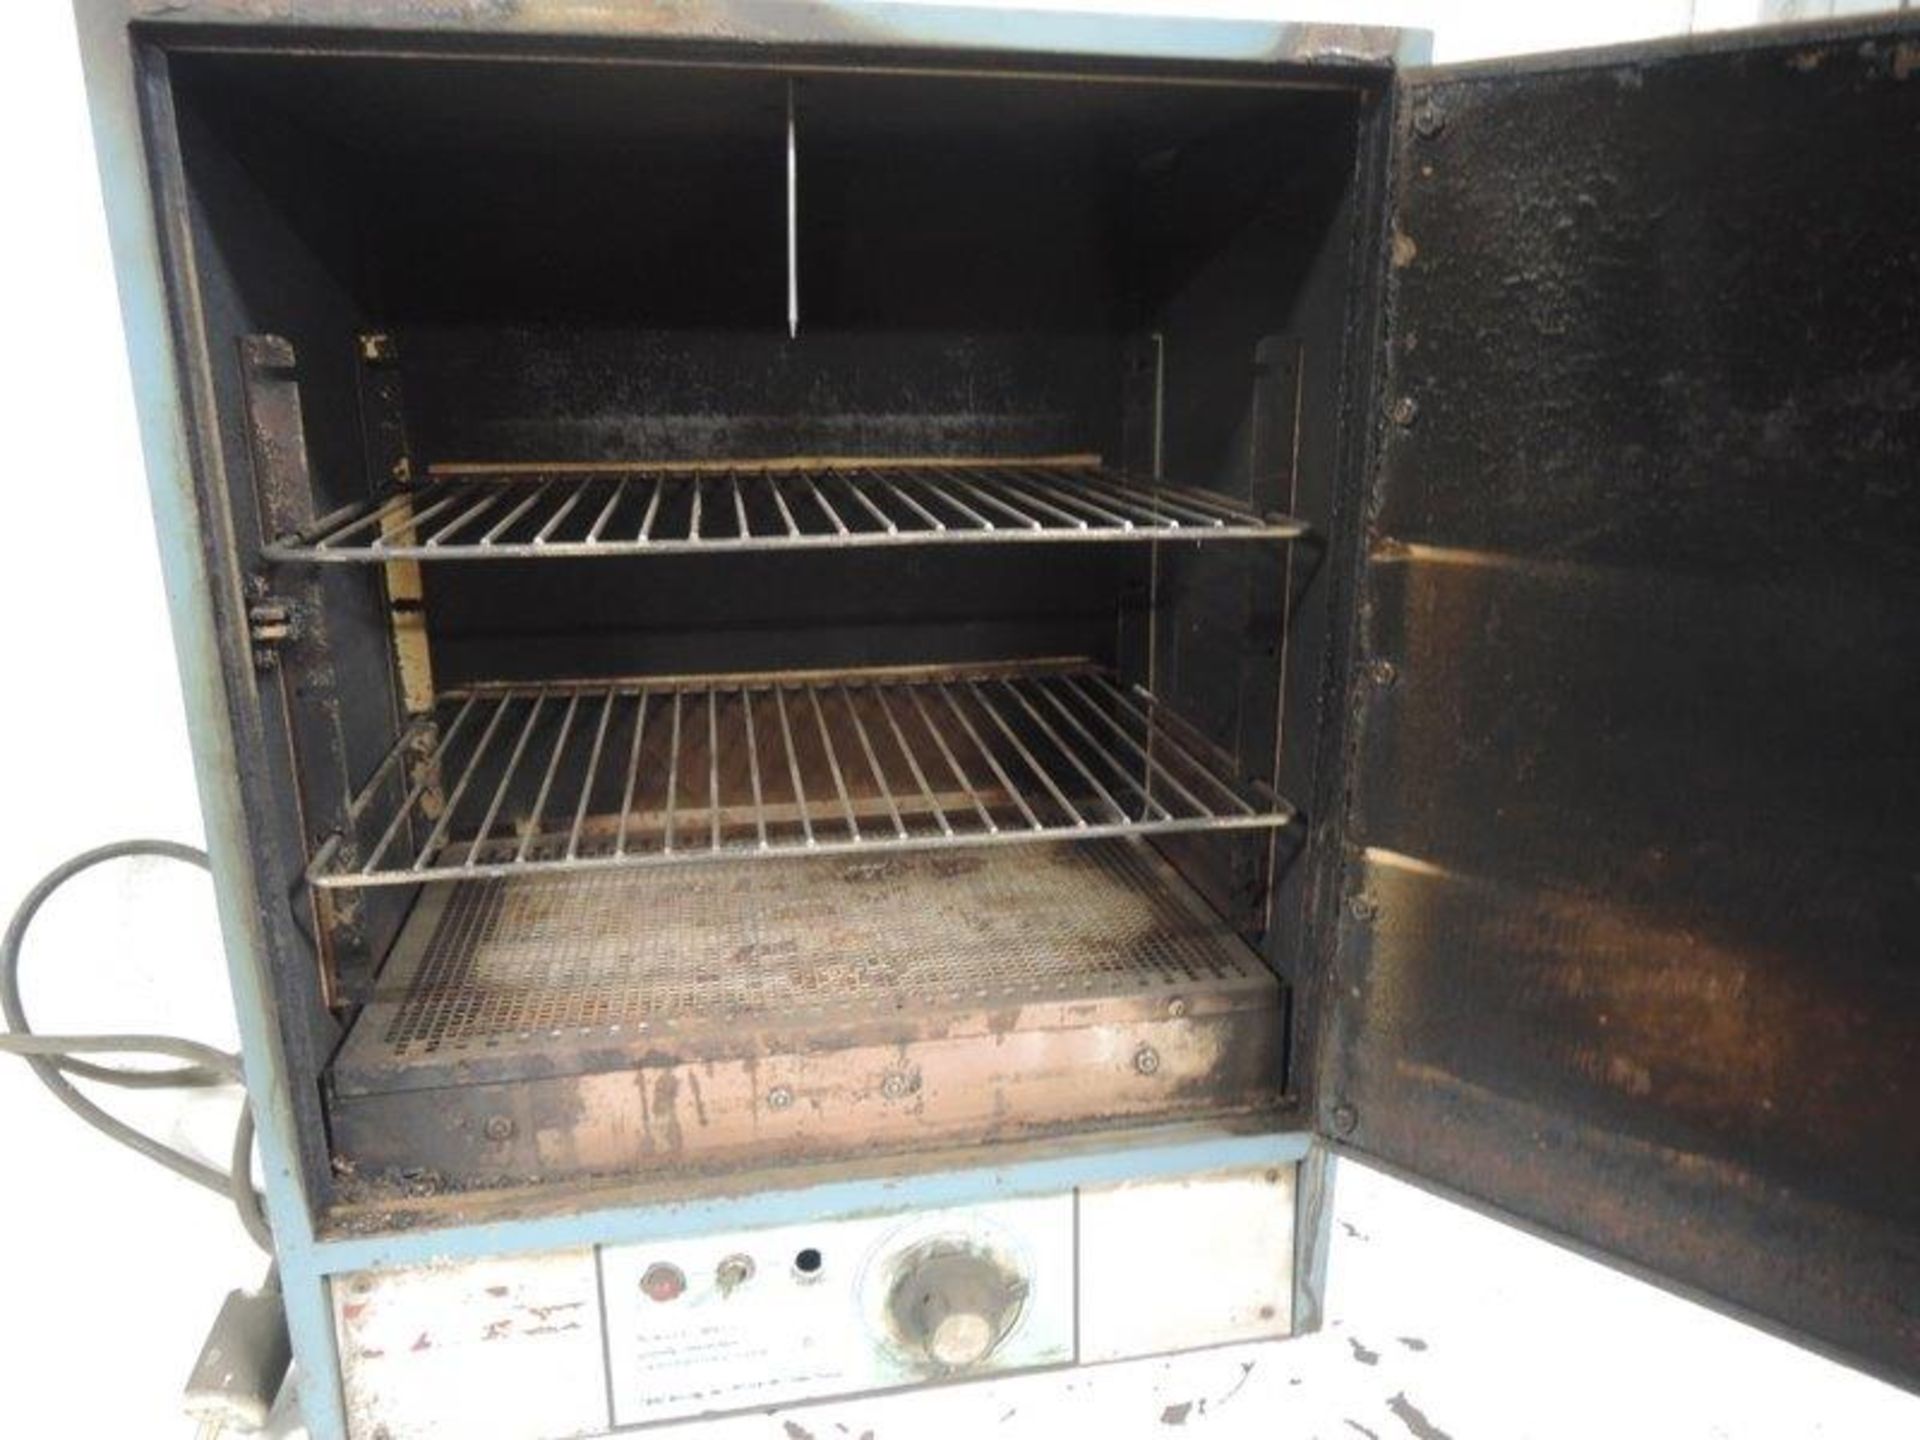 BLUE M MODEL SW-17TA S/N: 3199 OVEN UP TO 200 DEGREE C, 120V [WALTON HILLS, OH] - Image 3 of 4